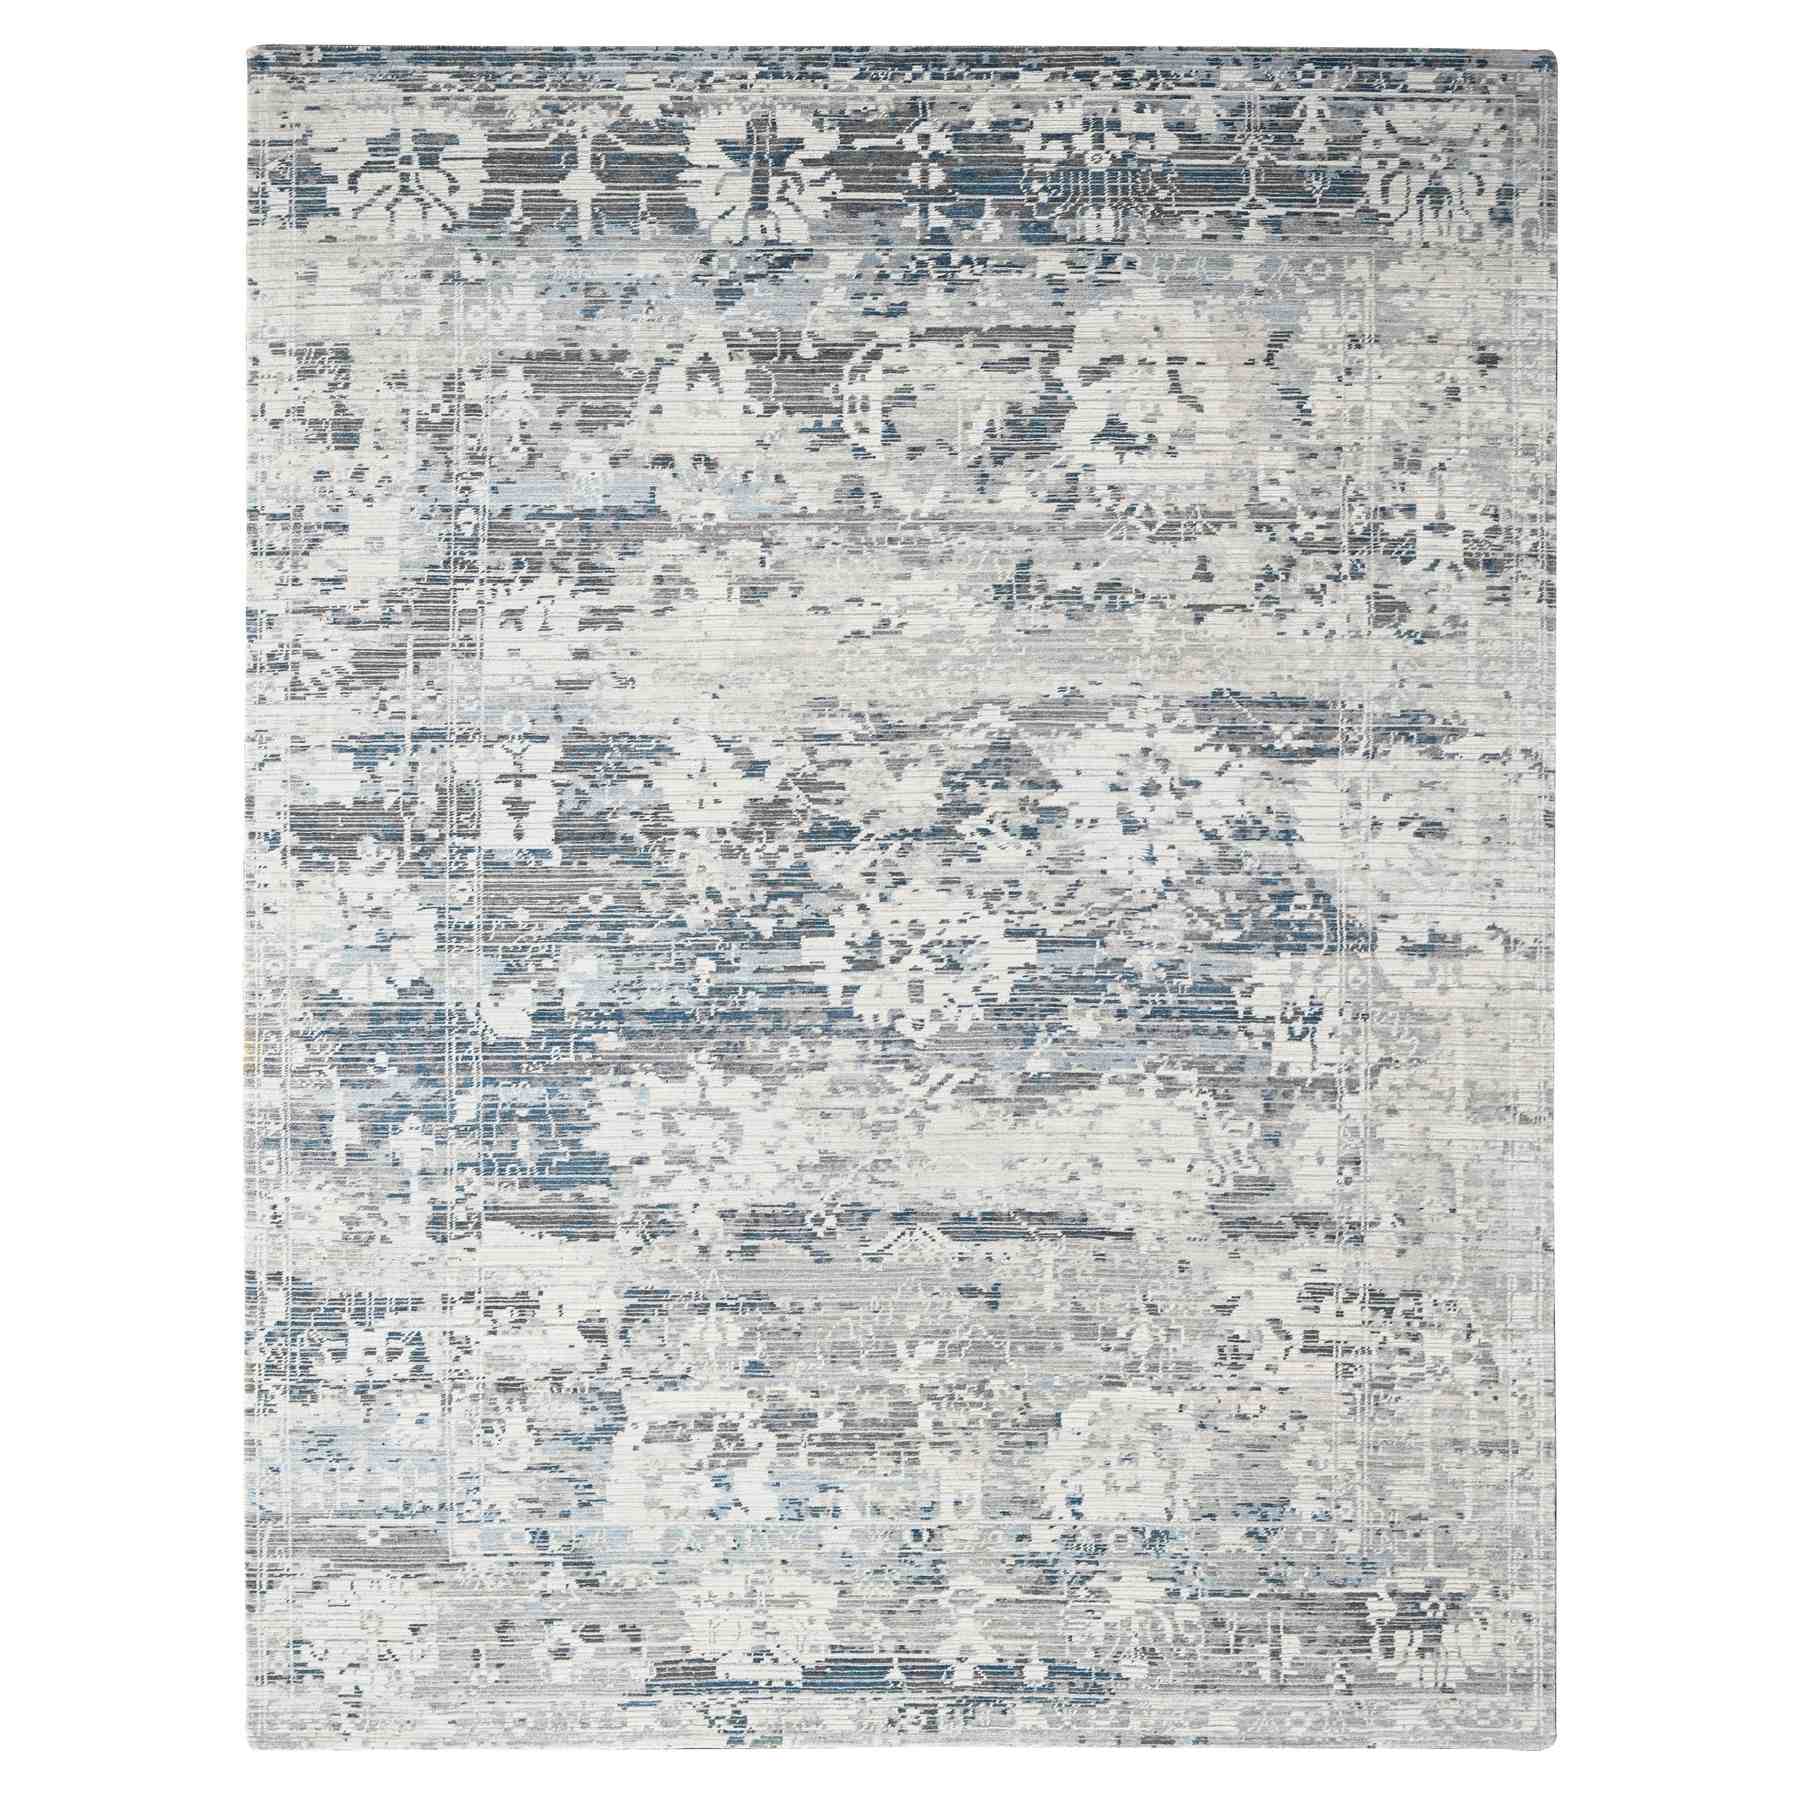 Modern-and-Contemporary-Hand-Knotted-Rug-422890